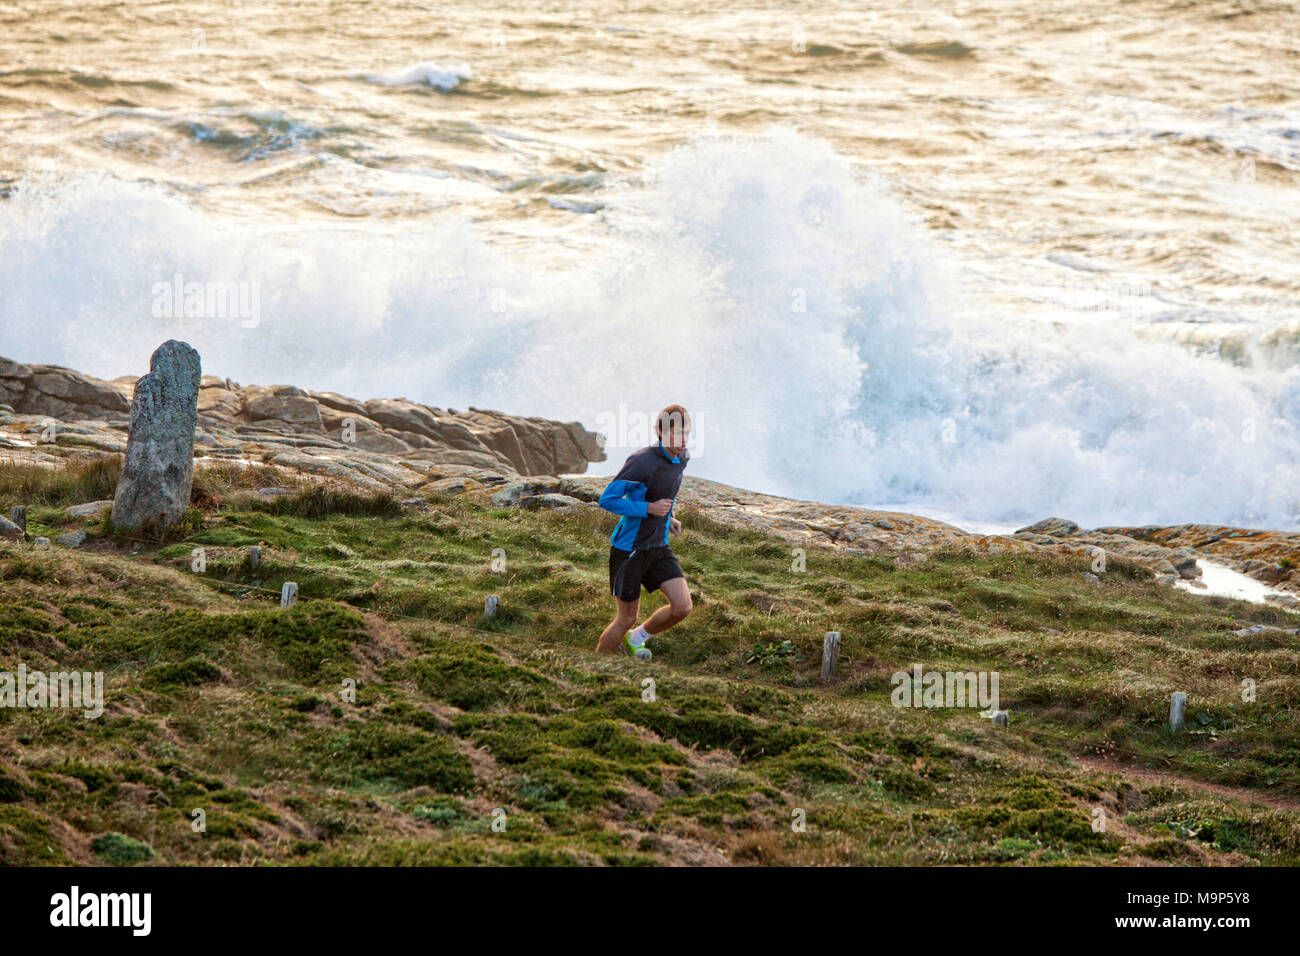 Man running during storm on coastline, Kerroch, Brittany, France Stock Photo